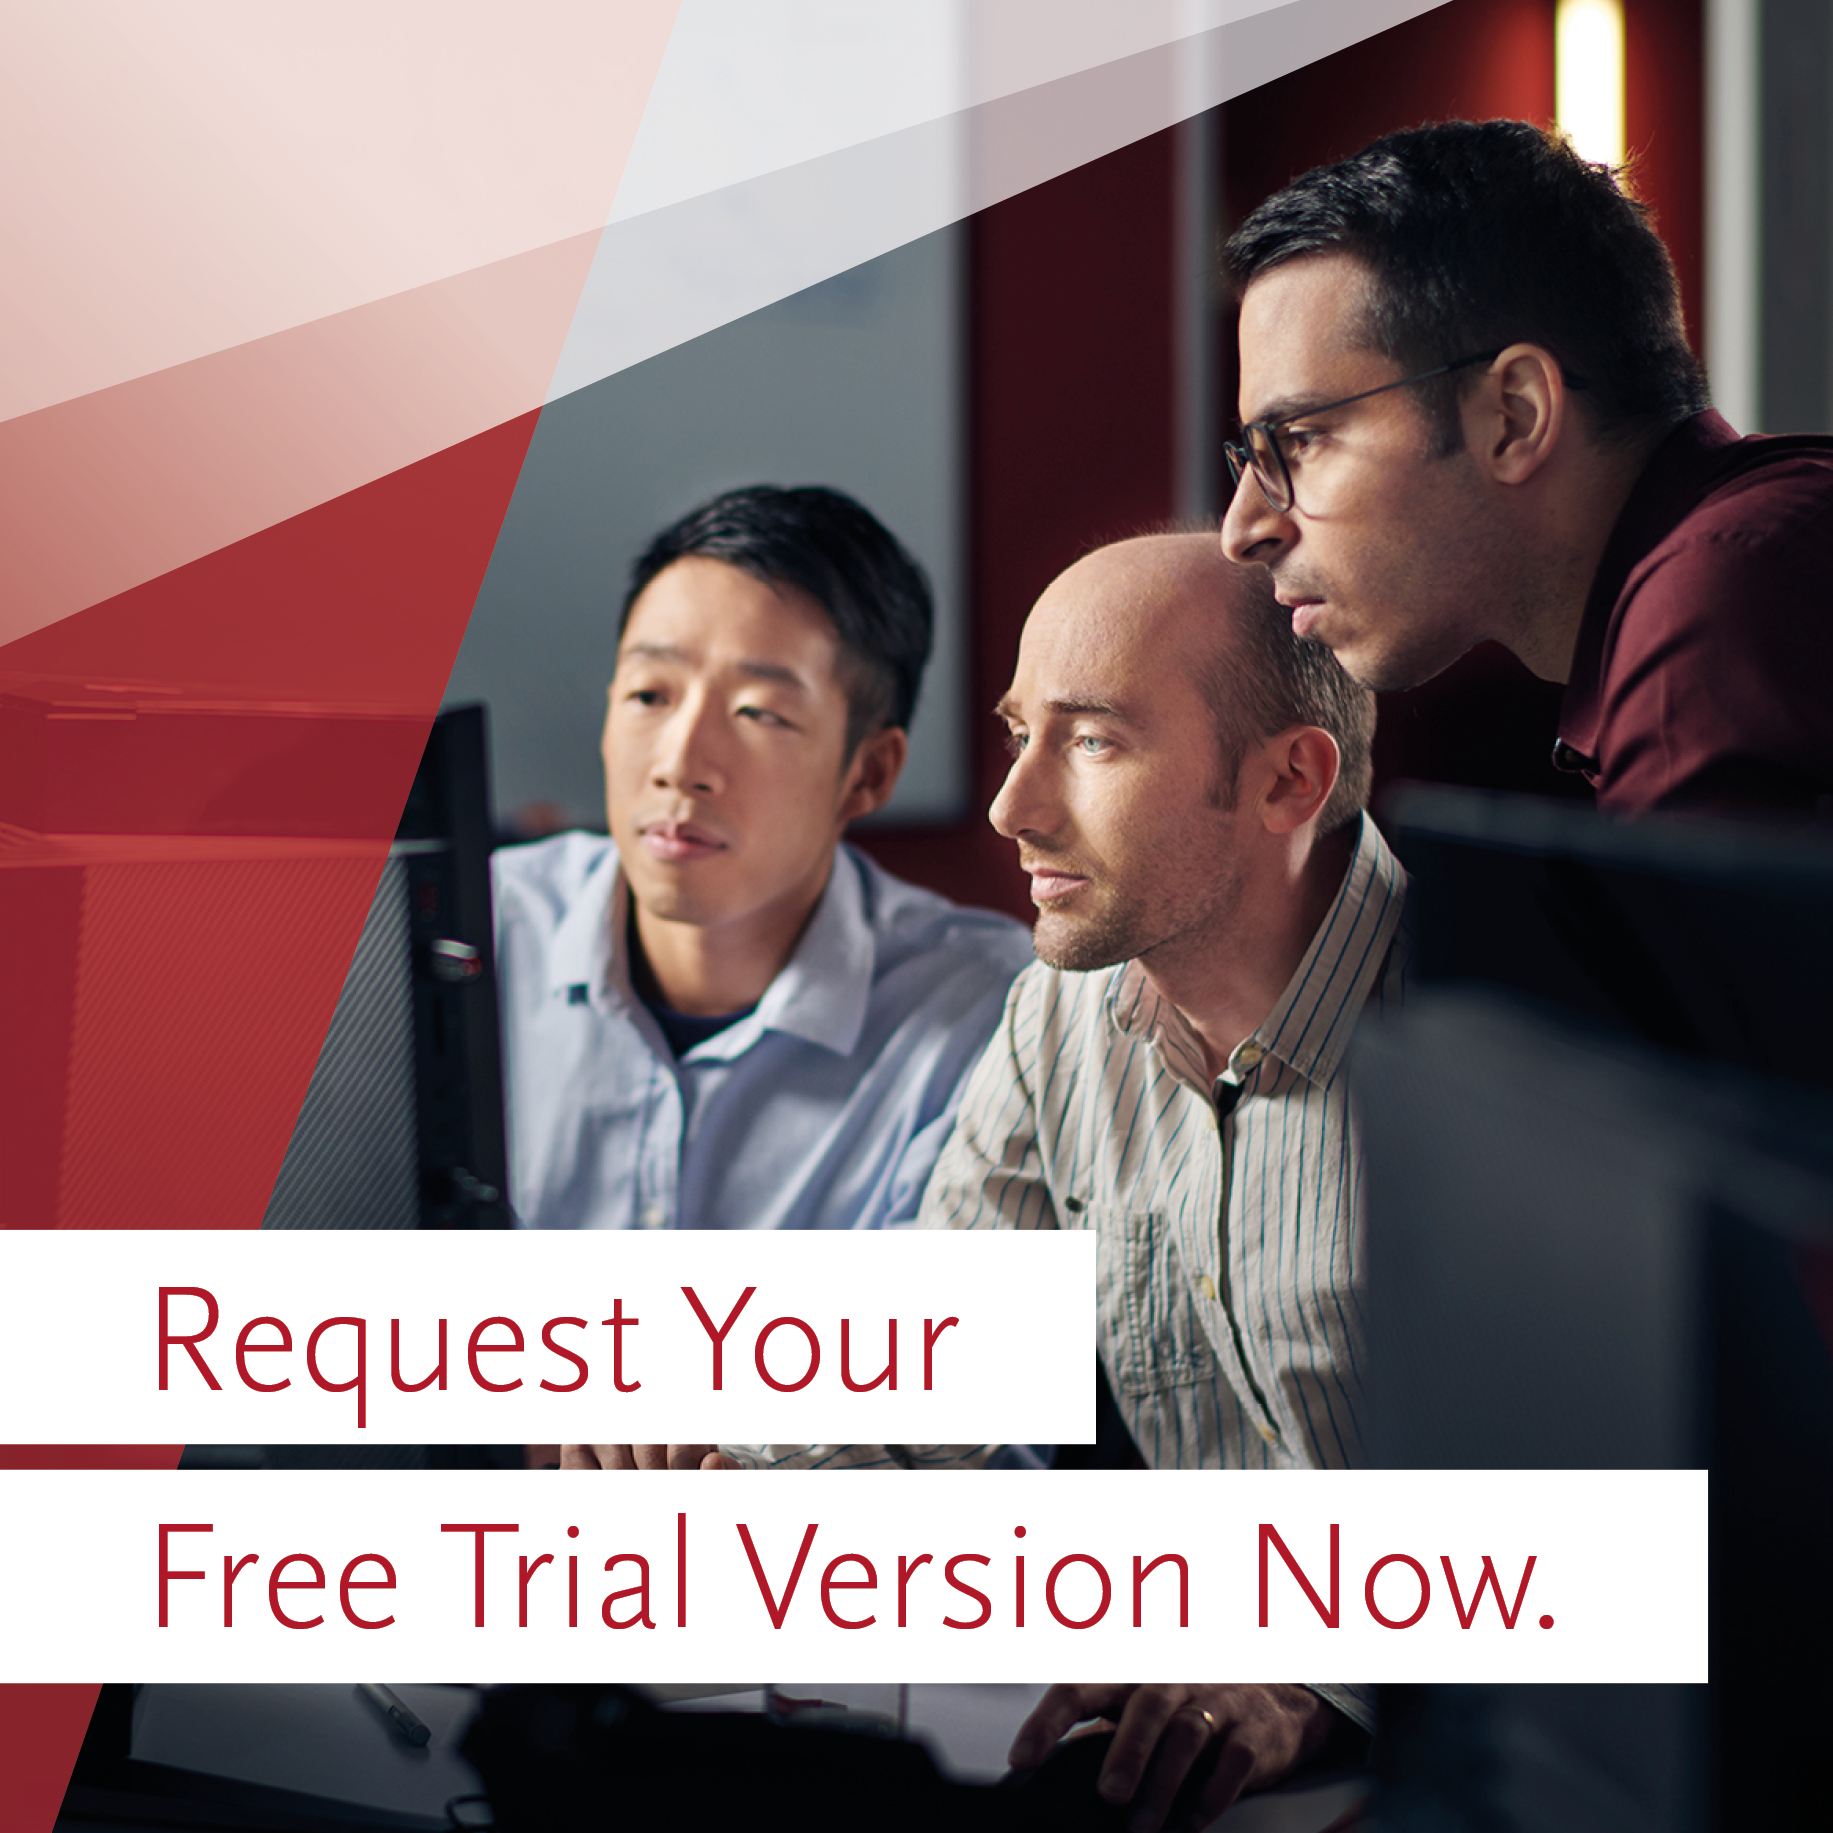 Redquest Your Free Trial Version Now from LightTrans International UG